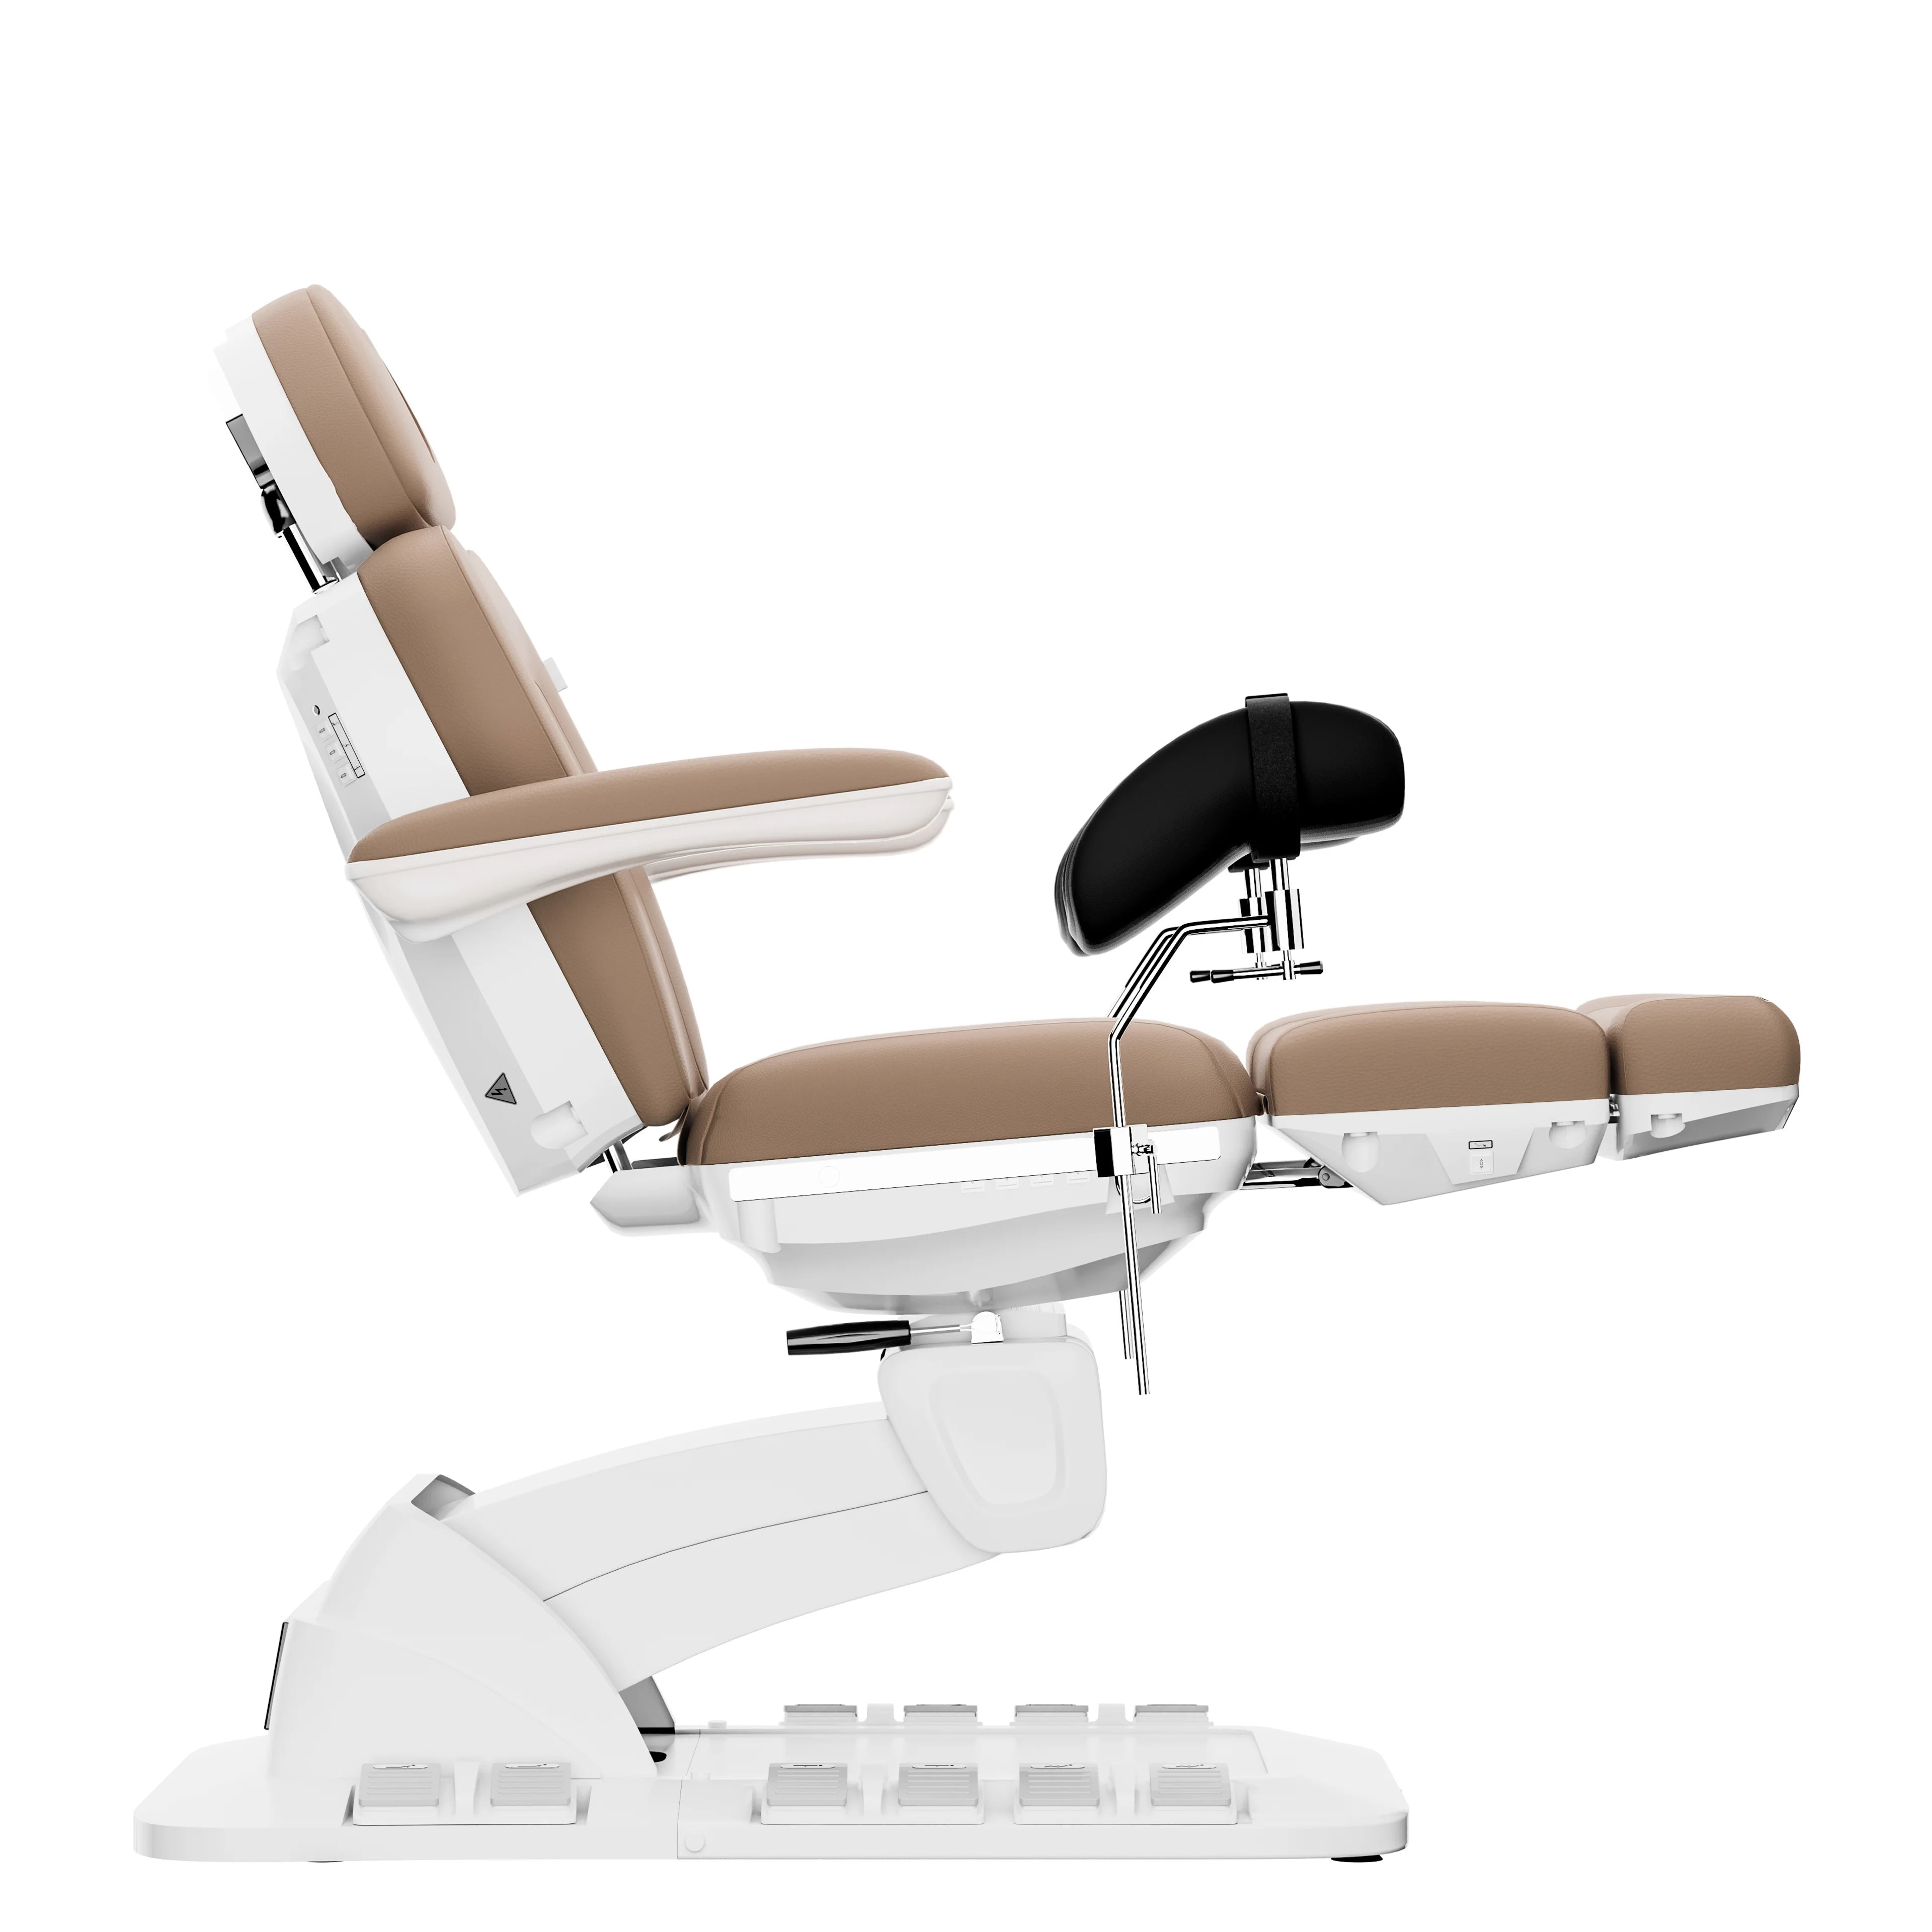 SPAMARC . Novato (Brown) . OBGYN & GYNECOLOGY . STIRRUPS . ROTATING . 4 MOTOR SPA TREATMENT CHAIR/BED